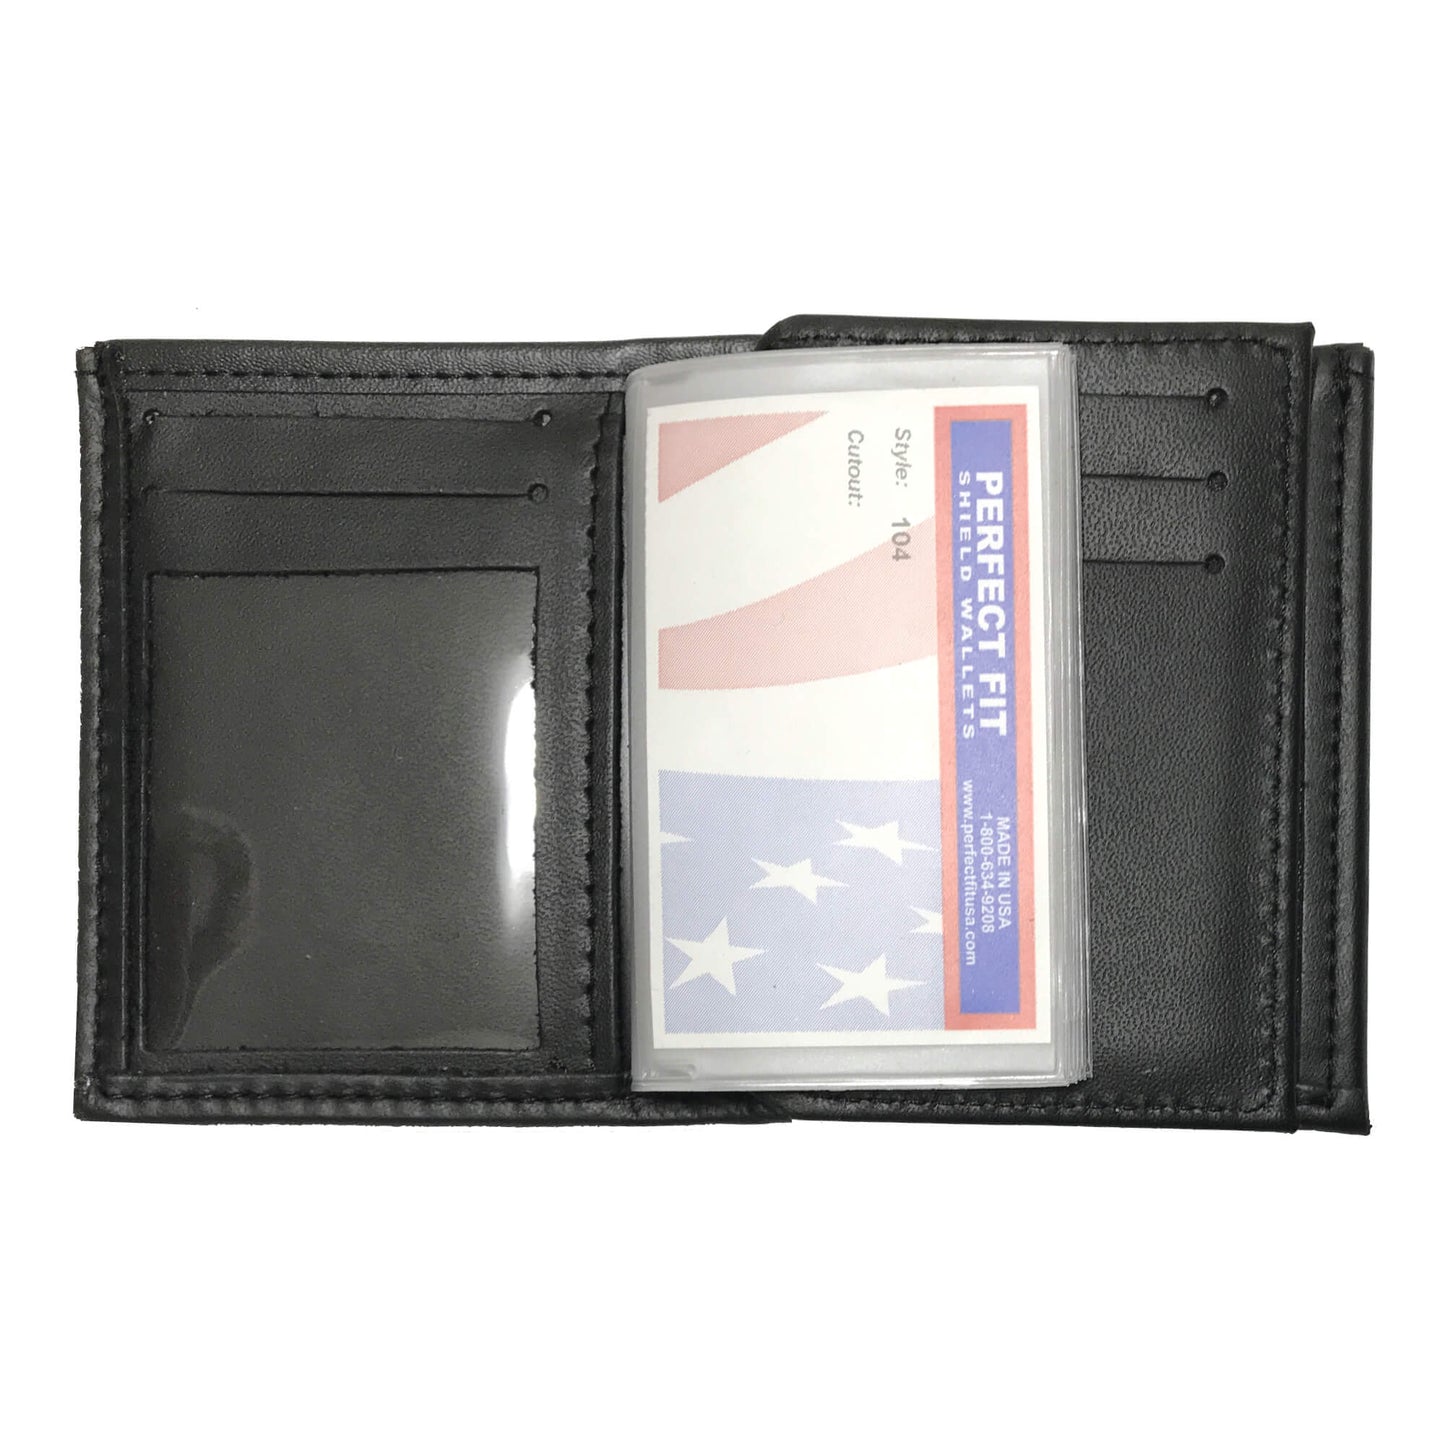 U.S. Army Military Police (CID) Bifold Hidden Badge Wallet-Perfect Fit-911 Duty Gear USA